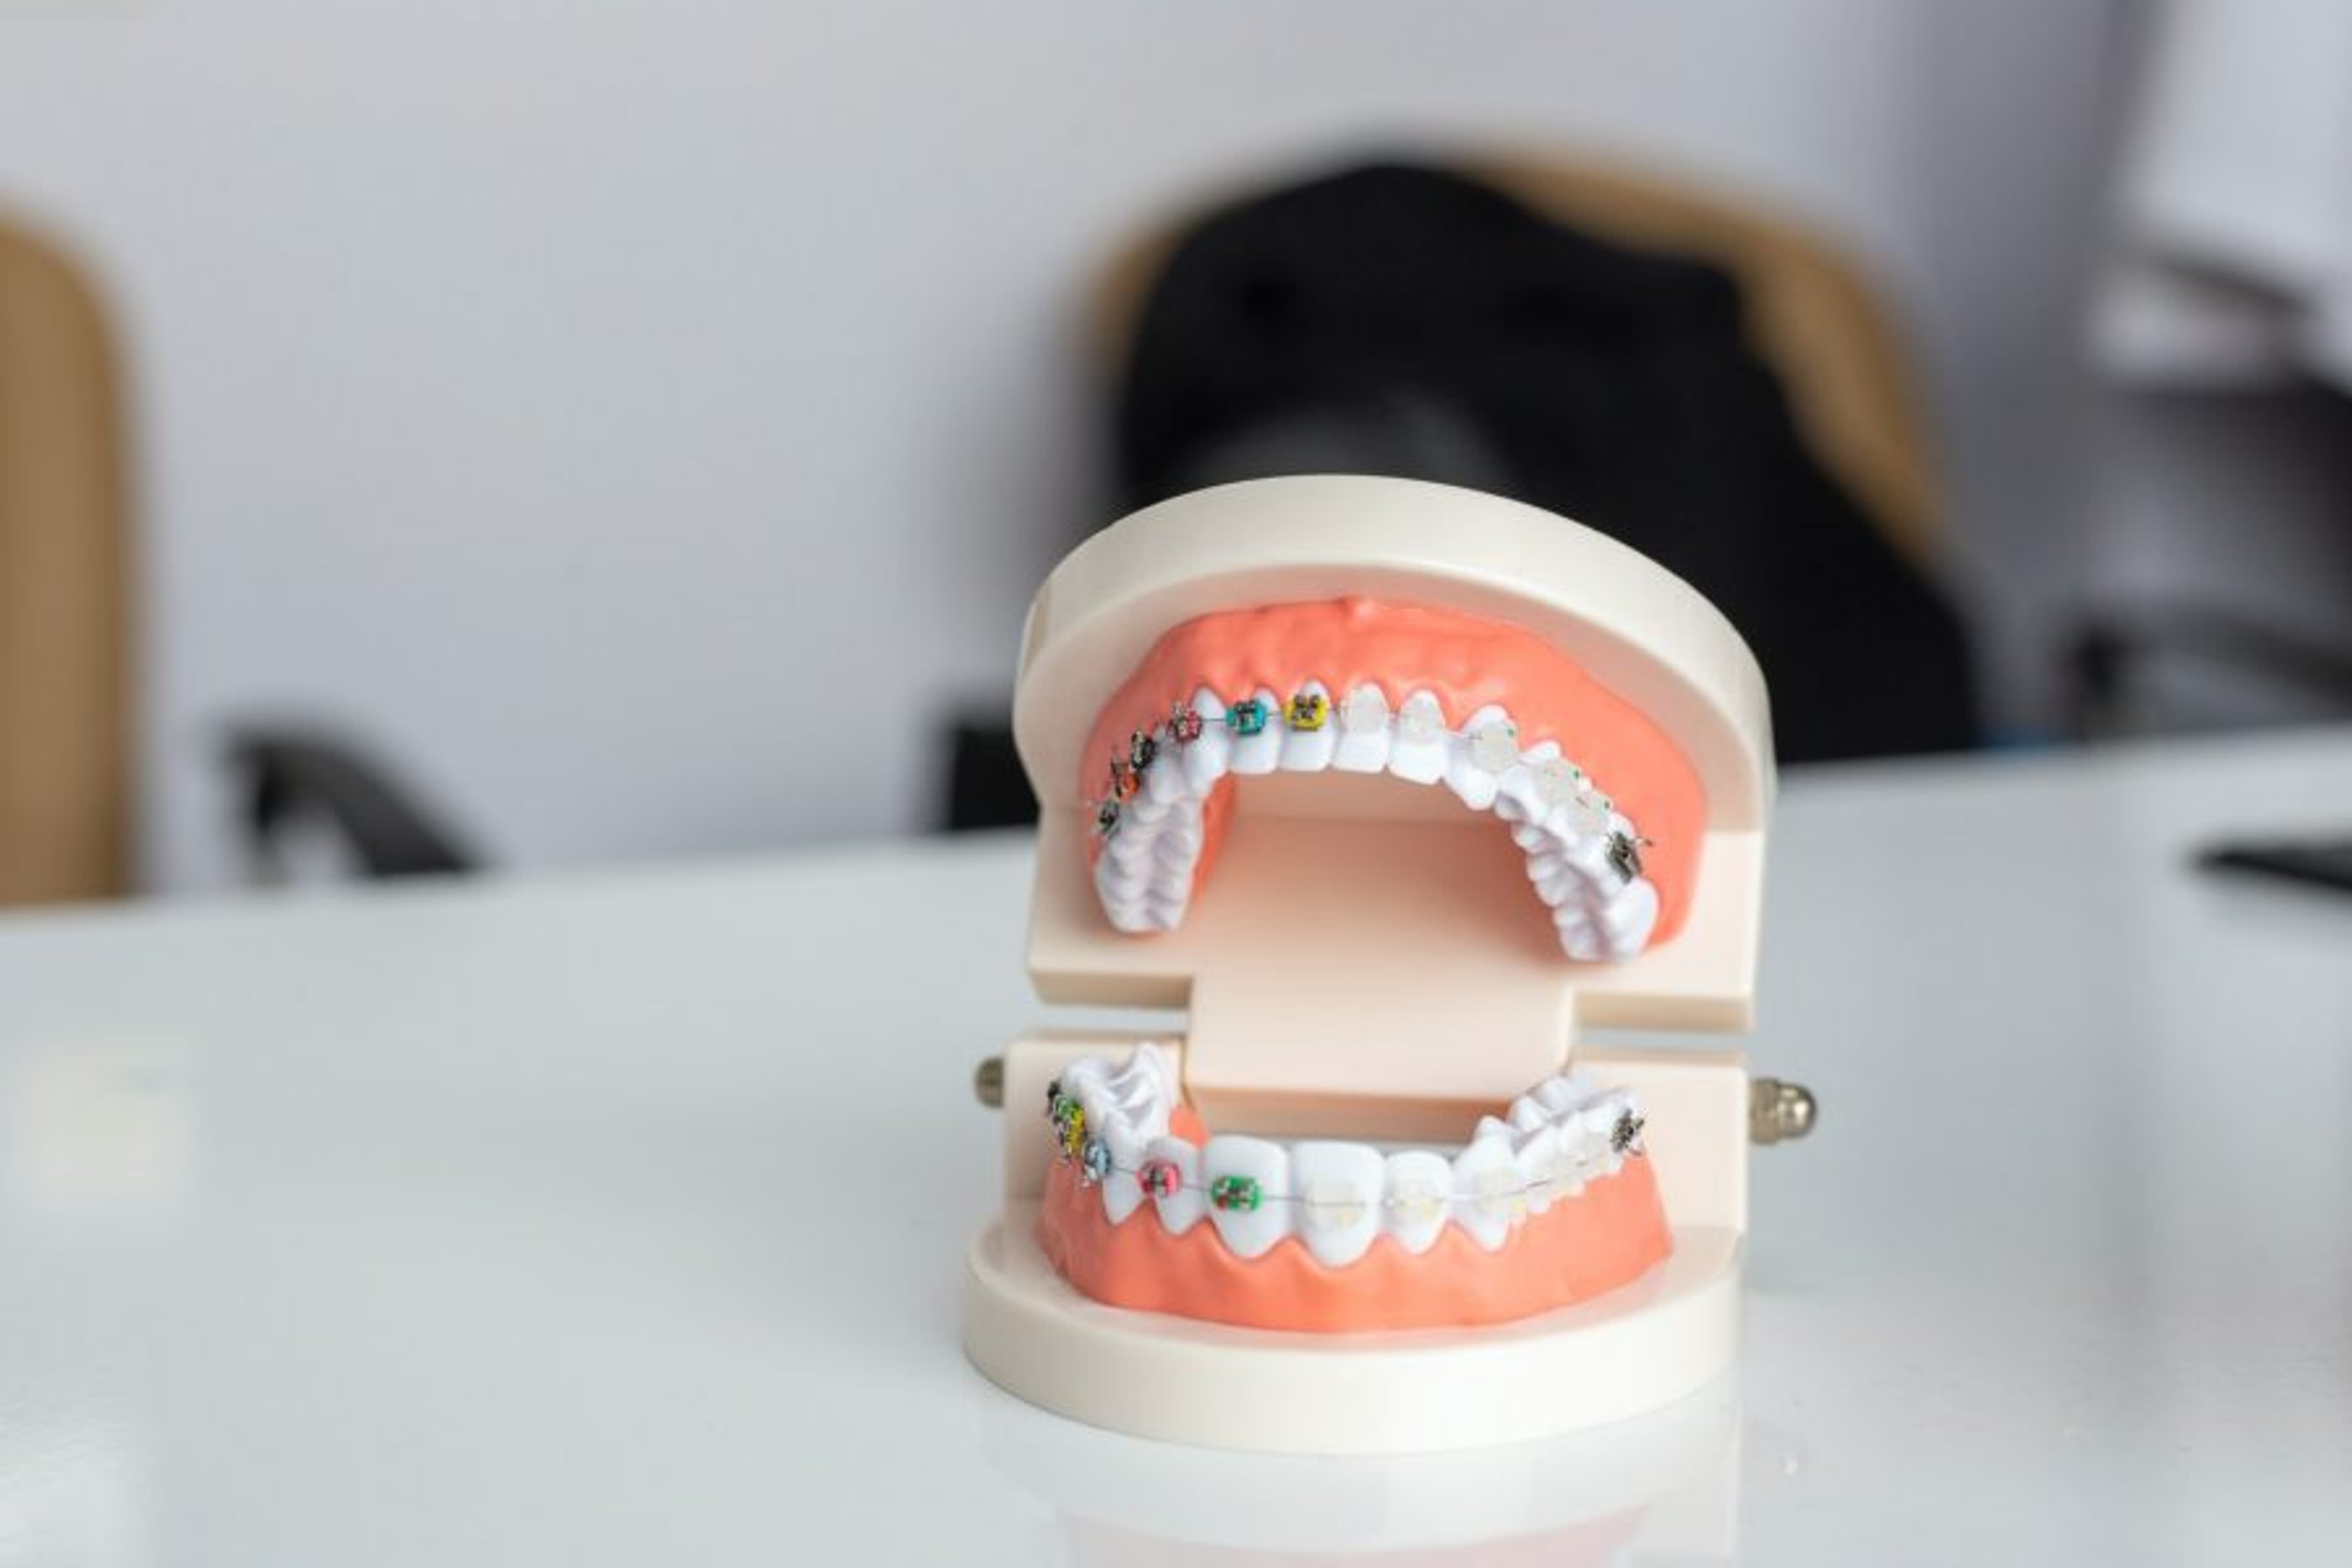 How to Save Money at the Orthodontist